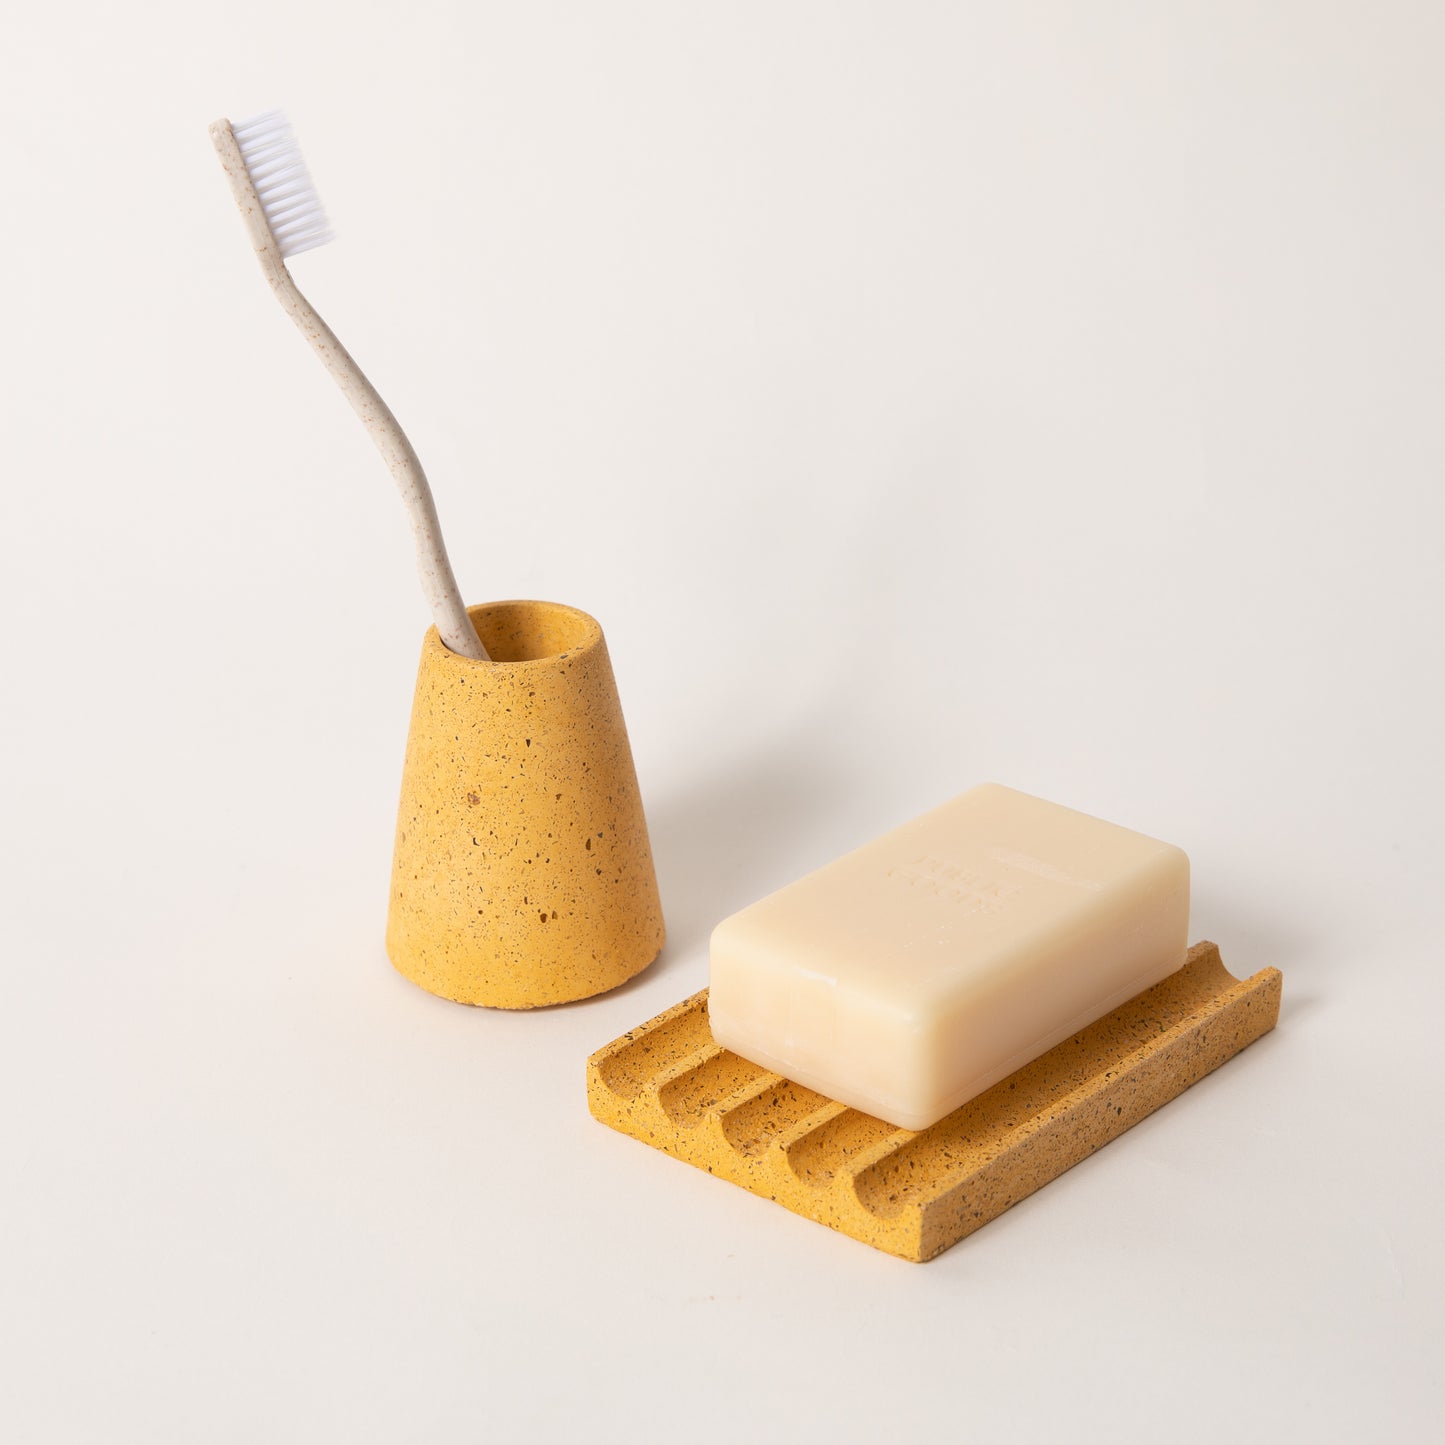 Marigold terrazzo toothbrush holder & soap dish set, styled with a toothbrush & bar of soap.